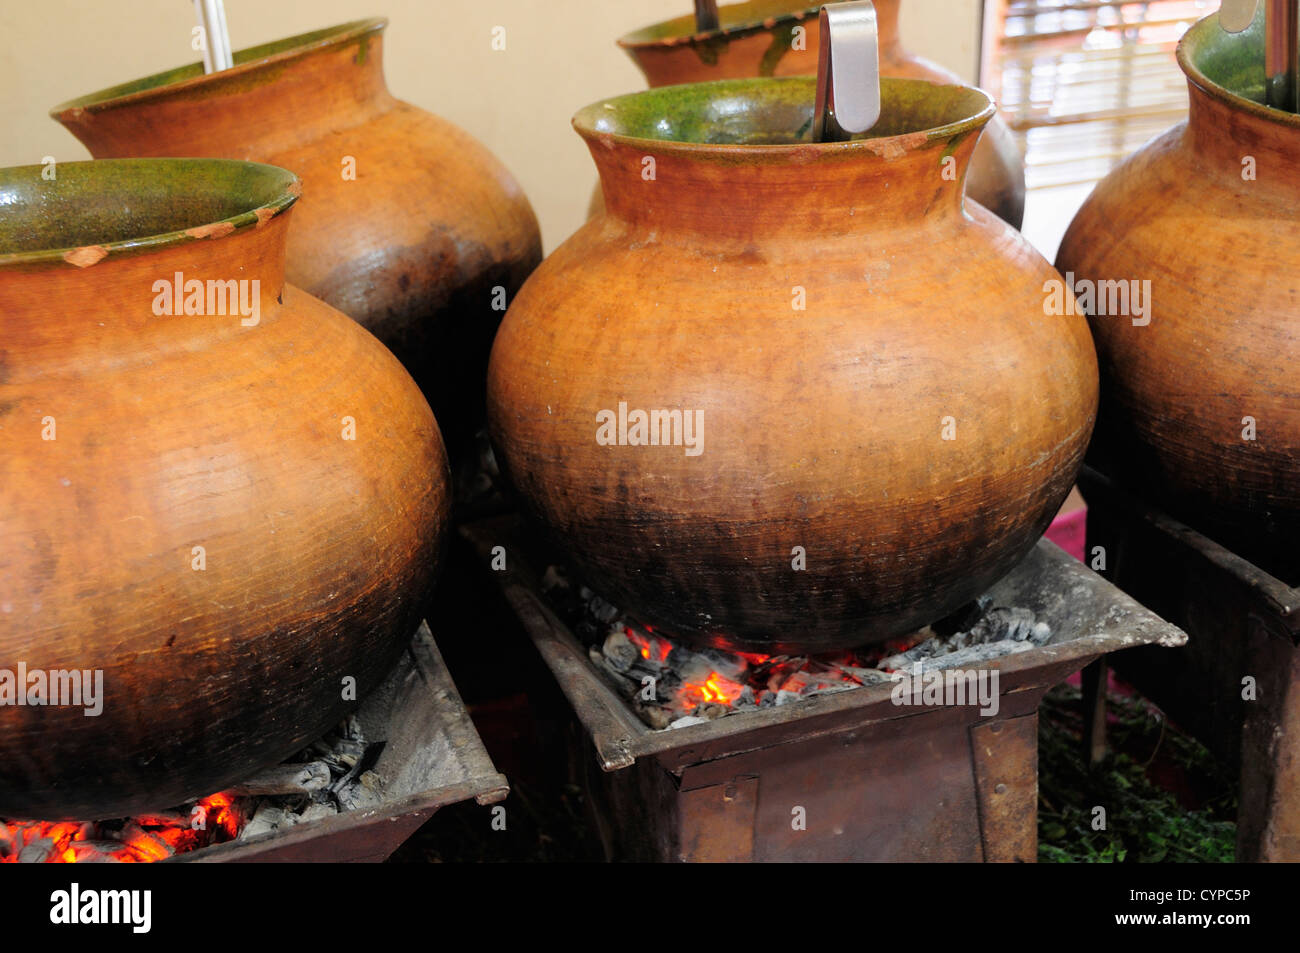 https://c8.alamy.com/comp/CYPC5P/mexico-oaxaca-large-round-earthenware-pots-of-food-cooking-over-hot-CYPC5P.jpg